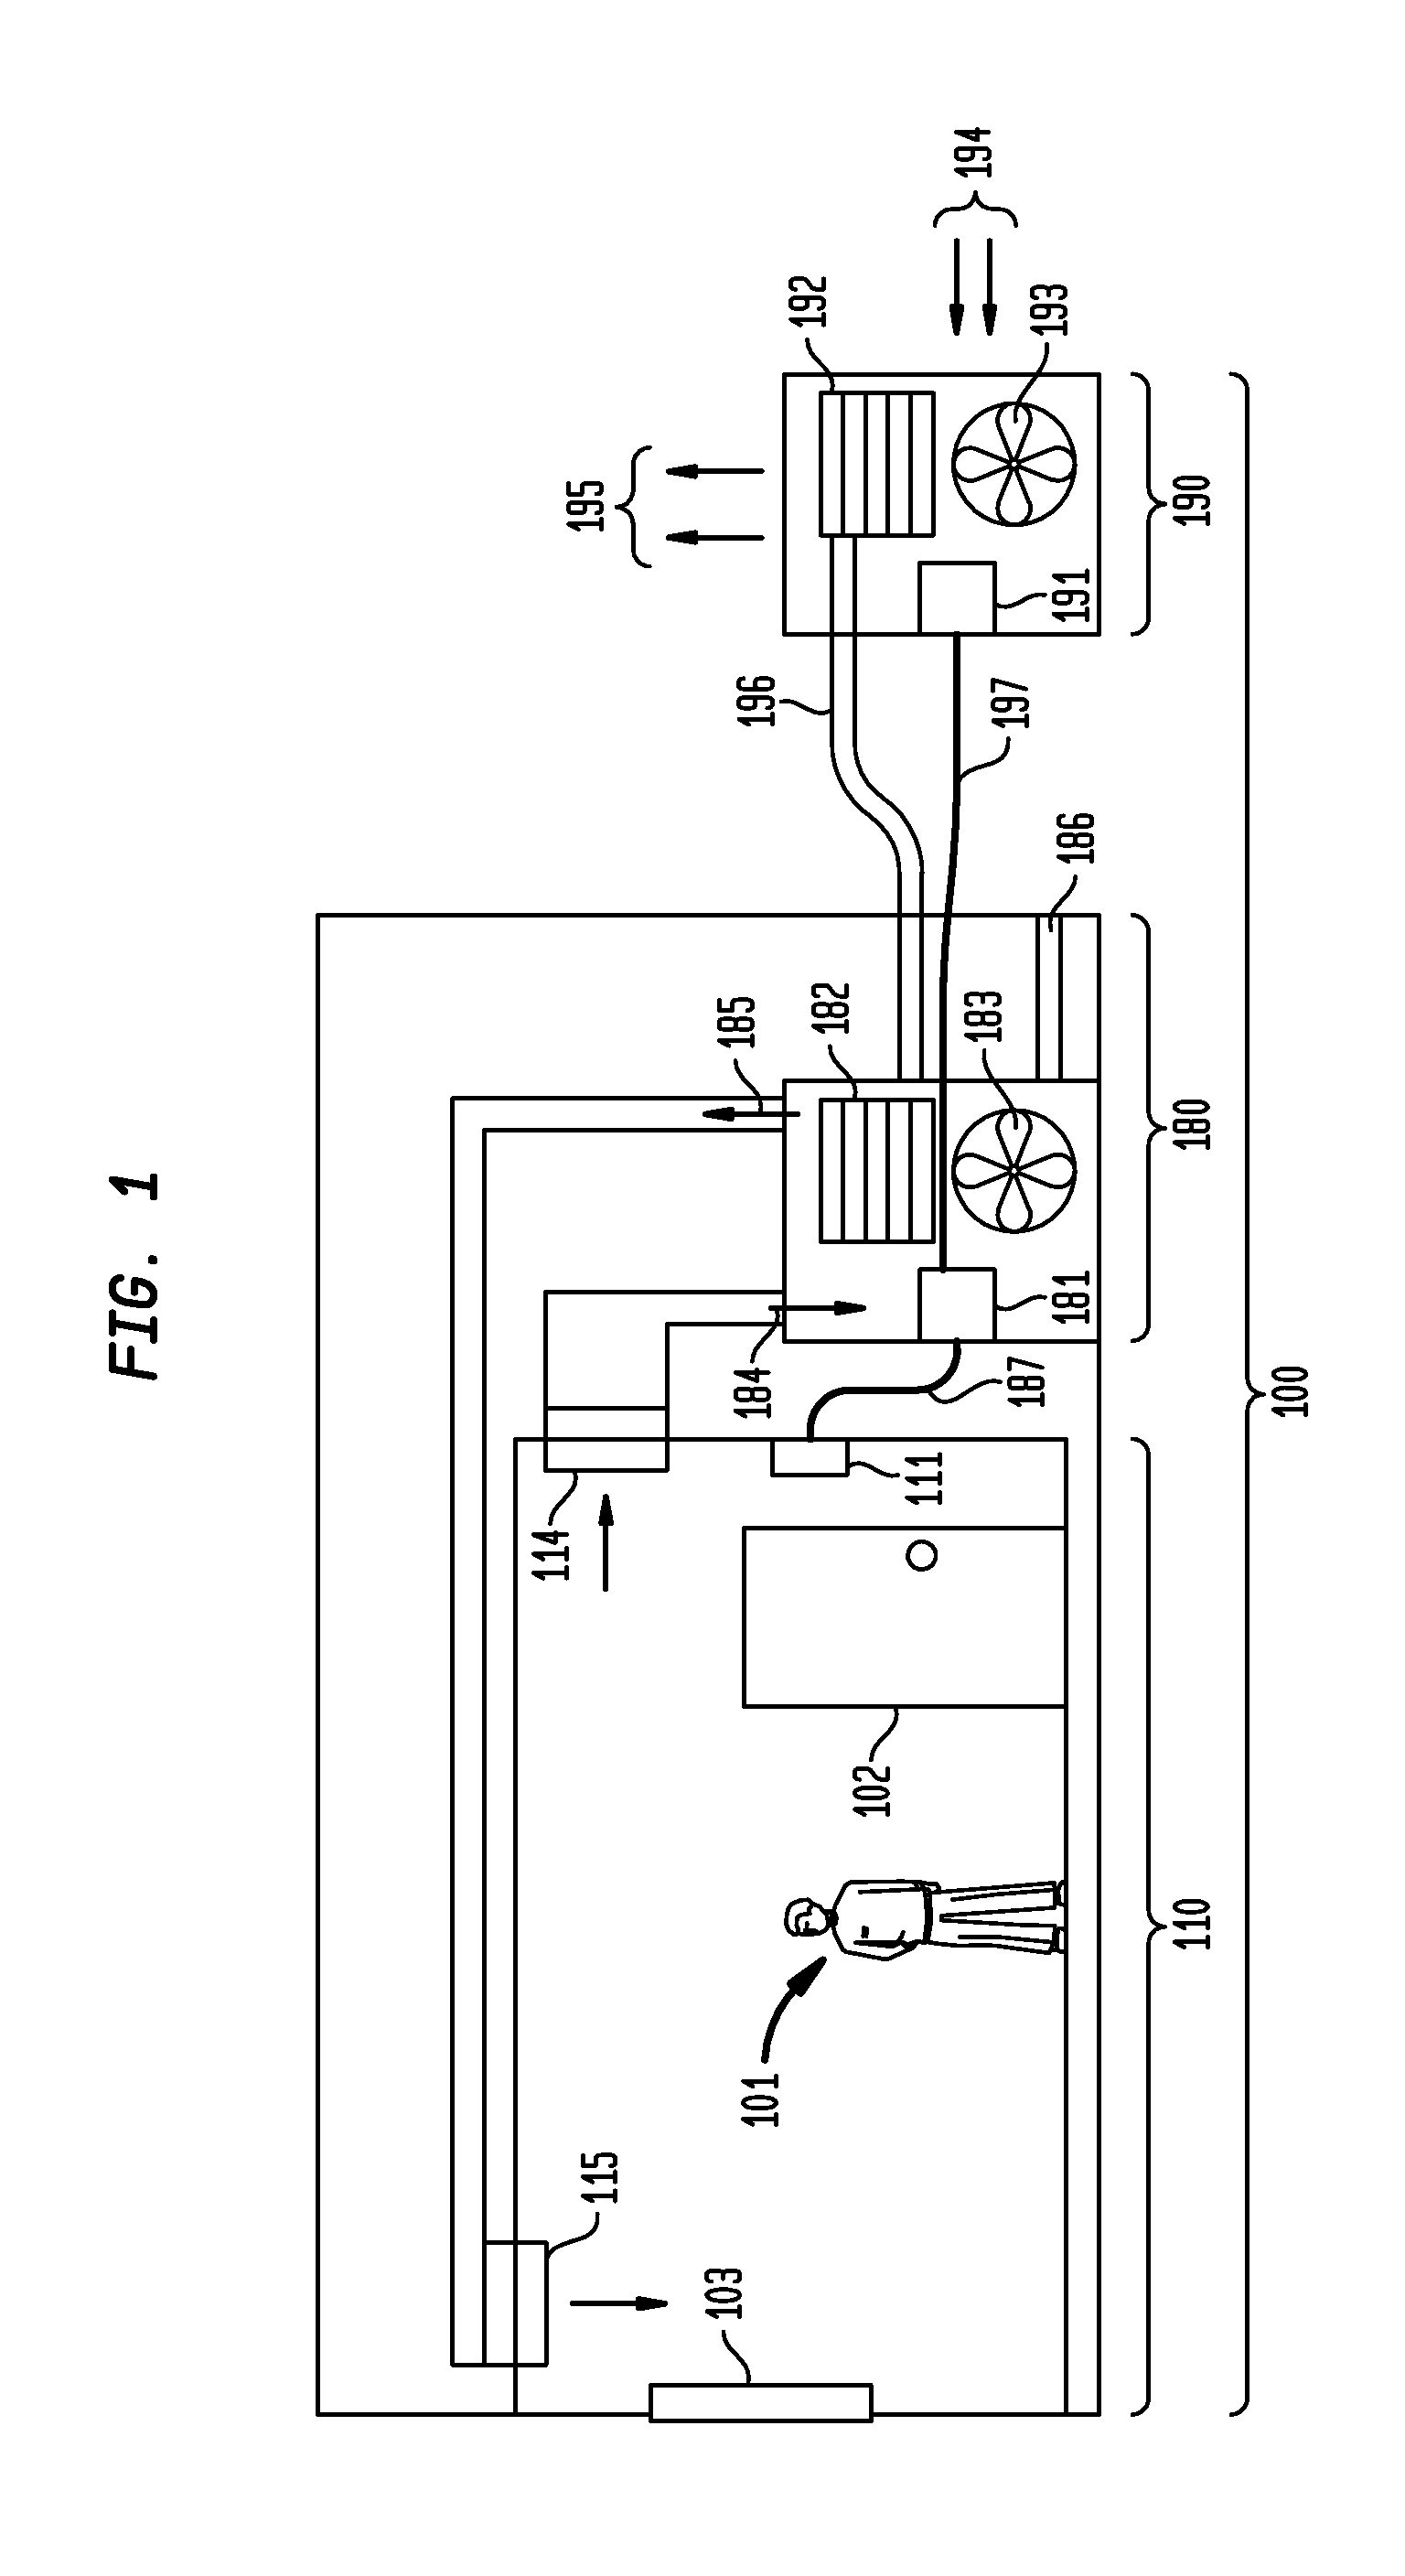 Methods and systems for environmental system control